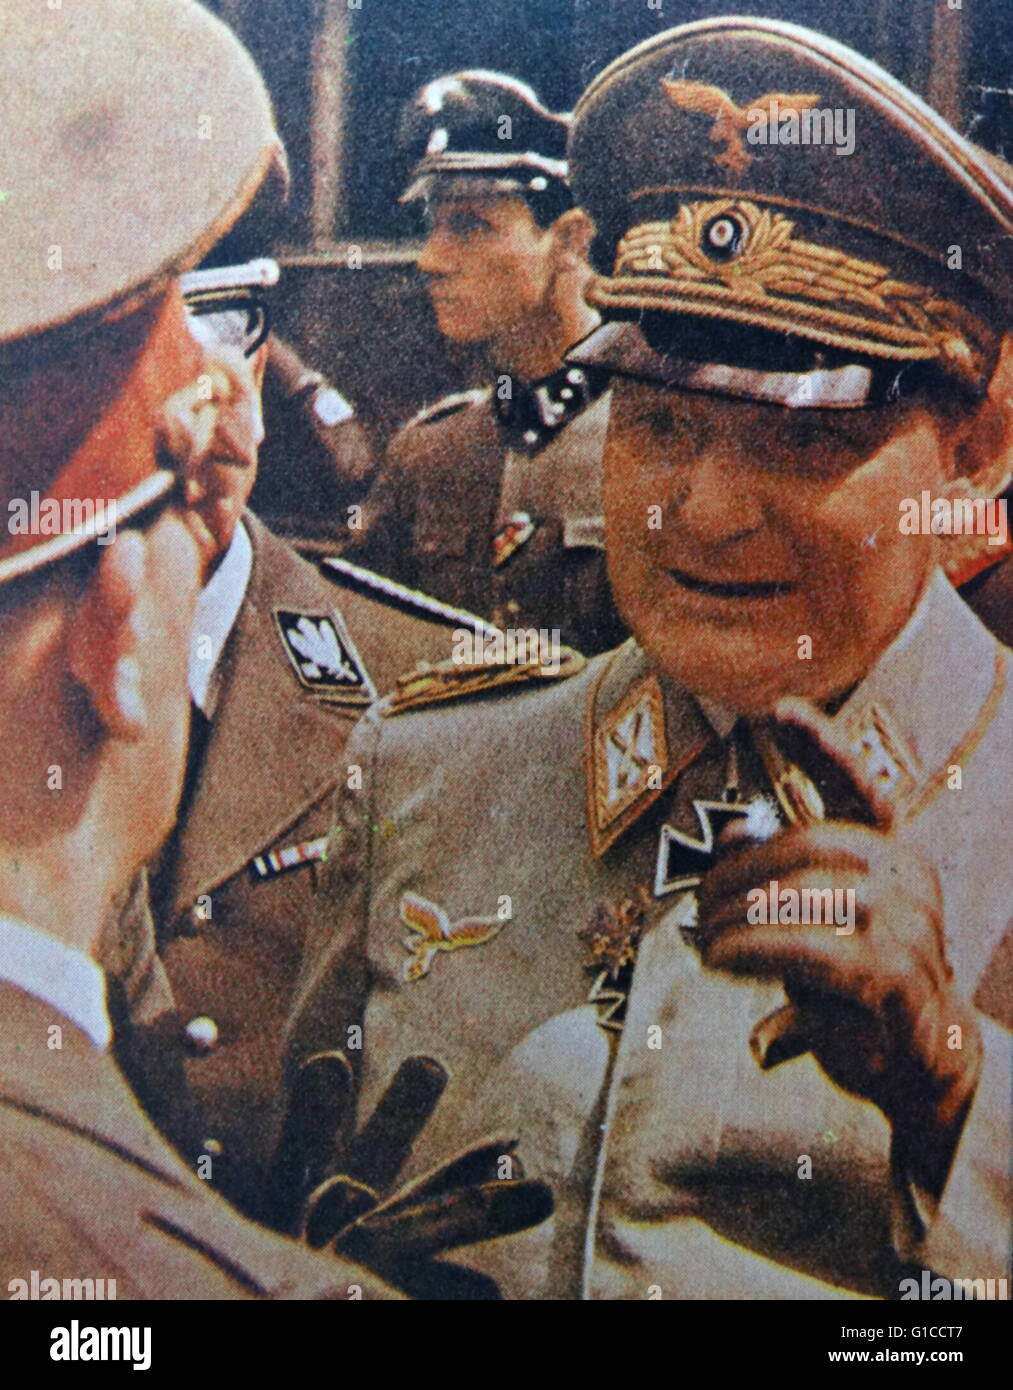 Colour photograph of Hermann Wilhelm Göring (1893-1946) a German politician, military leader, and leading member of the Nazi Party. Dated 20th Century Stock Photo